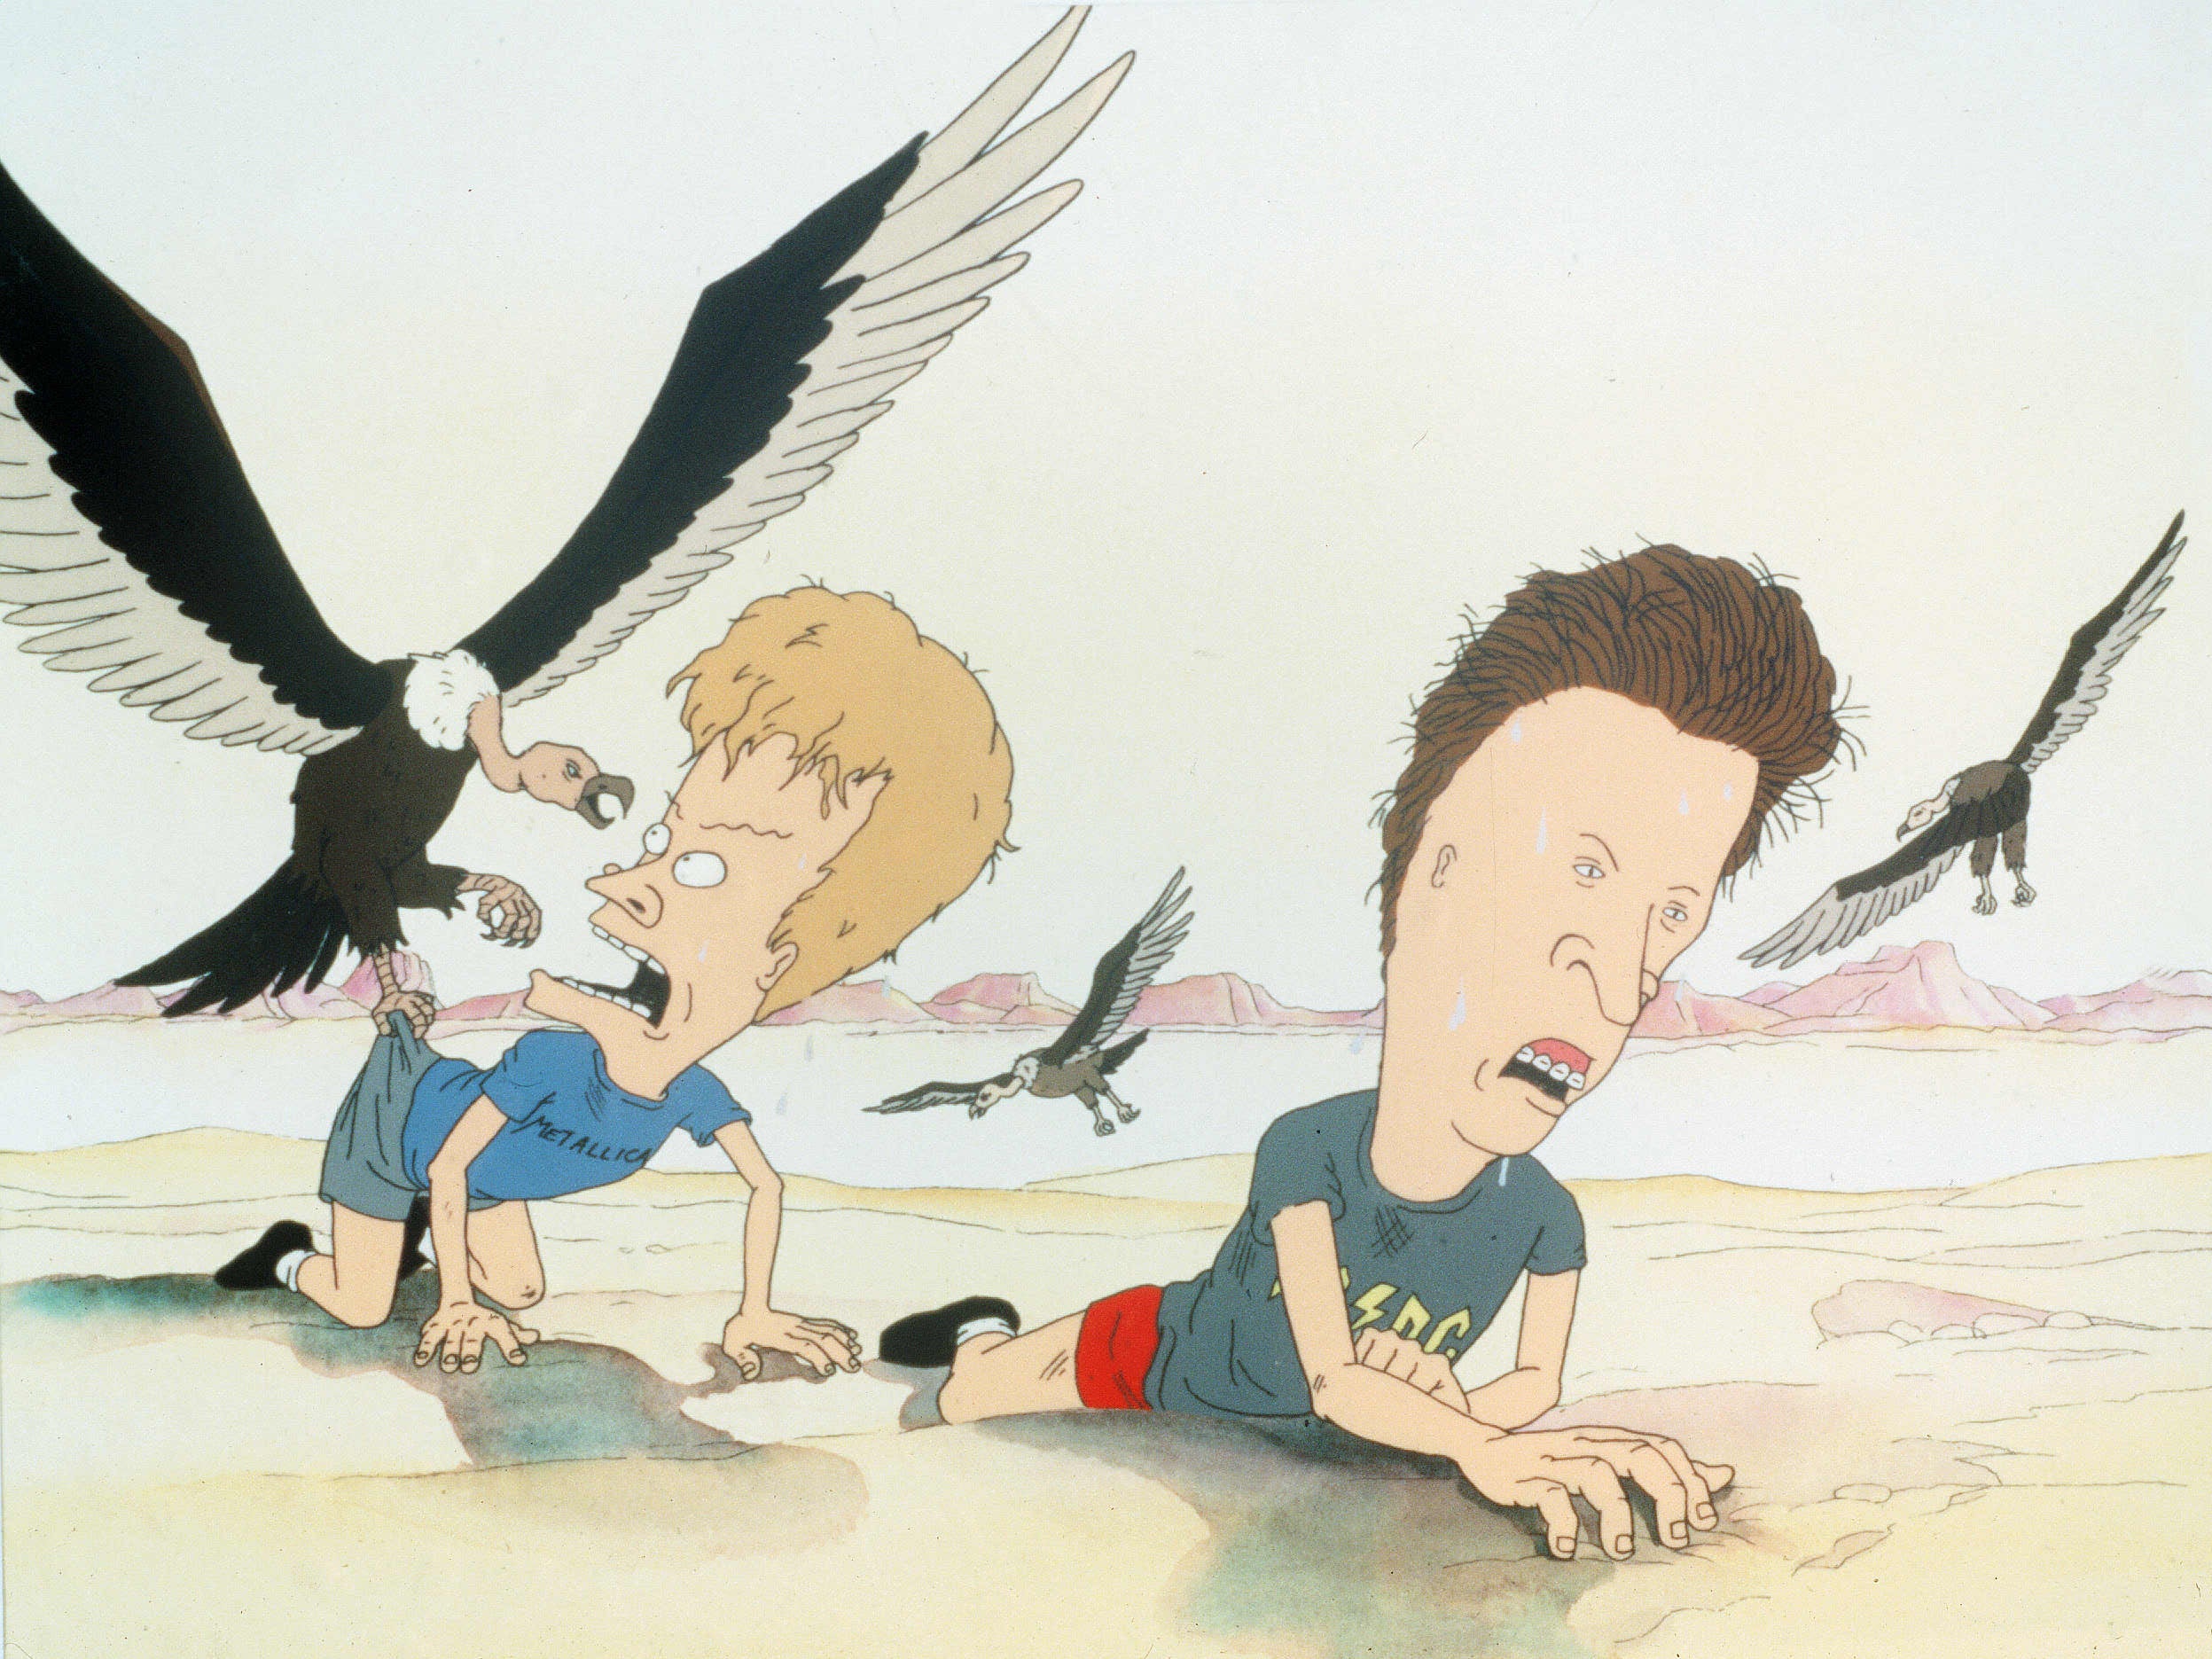 Beavis and Butt-Head lost in the desert during their big screen debut (Rex)